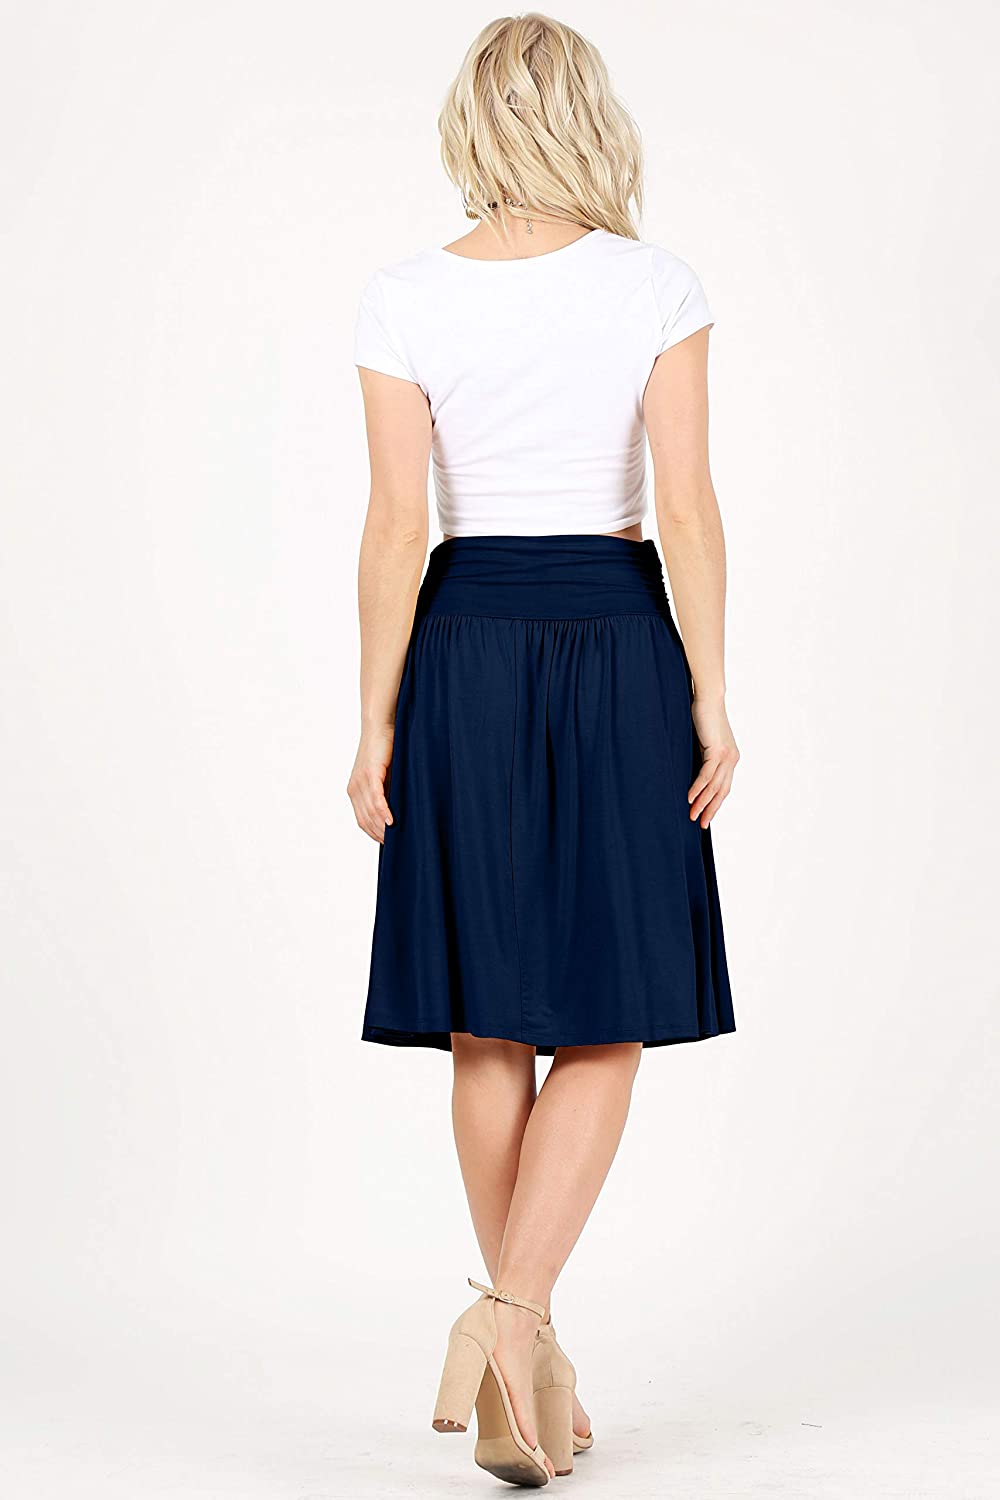 Simlu Womens Regular and Plus Size Skirt with Pockets Below The Knee ...